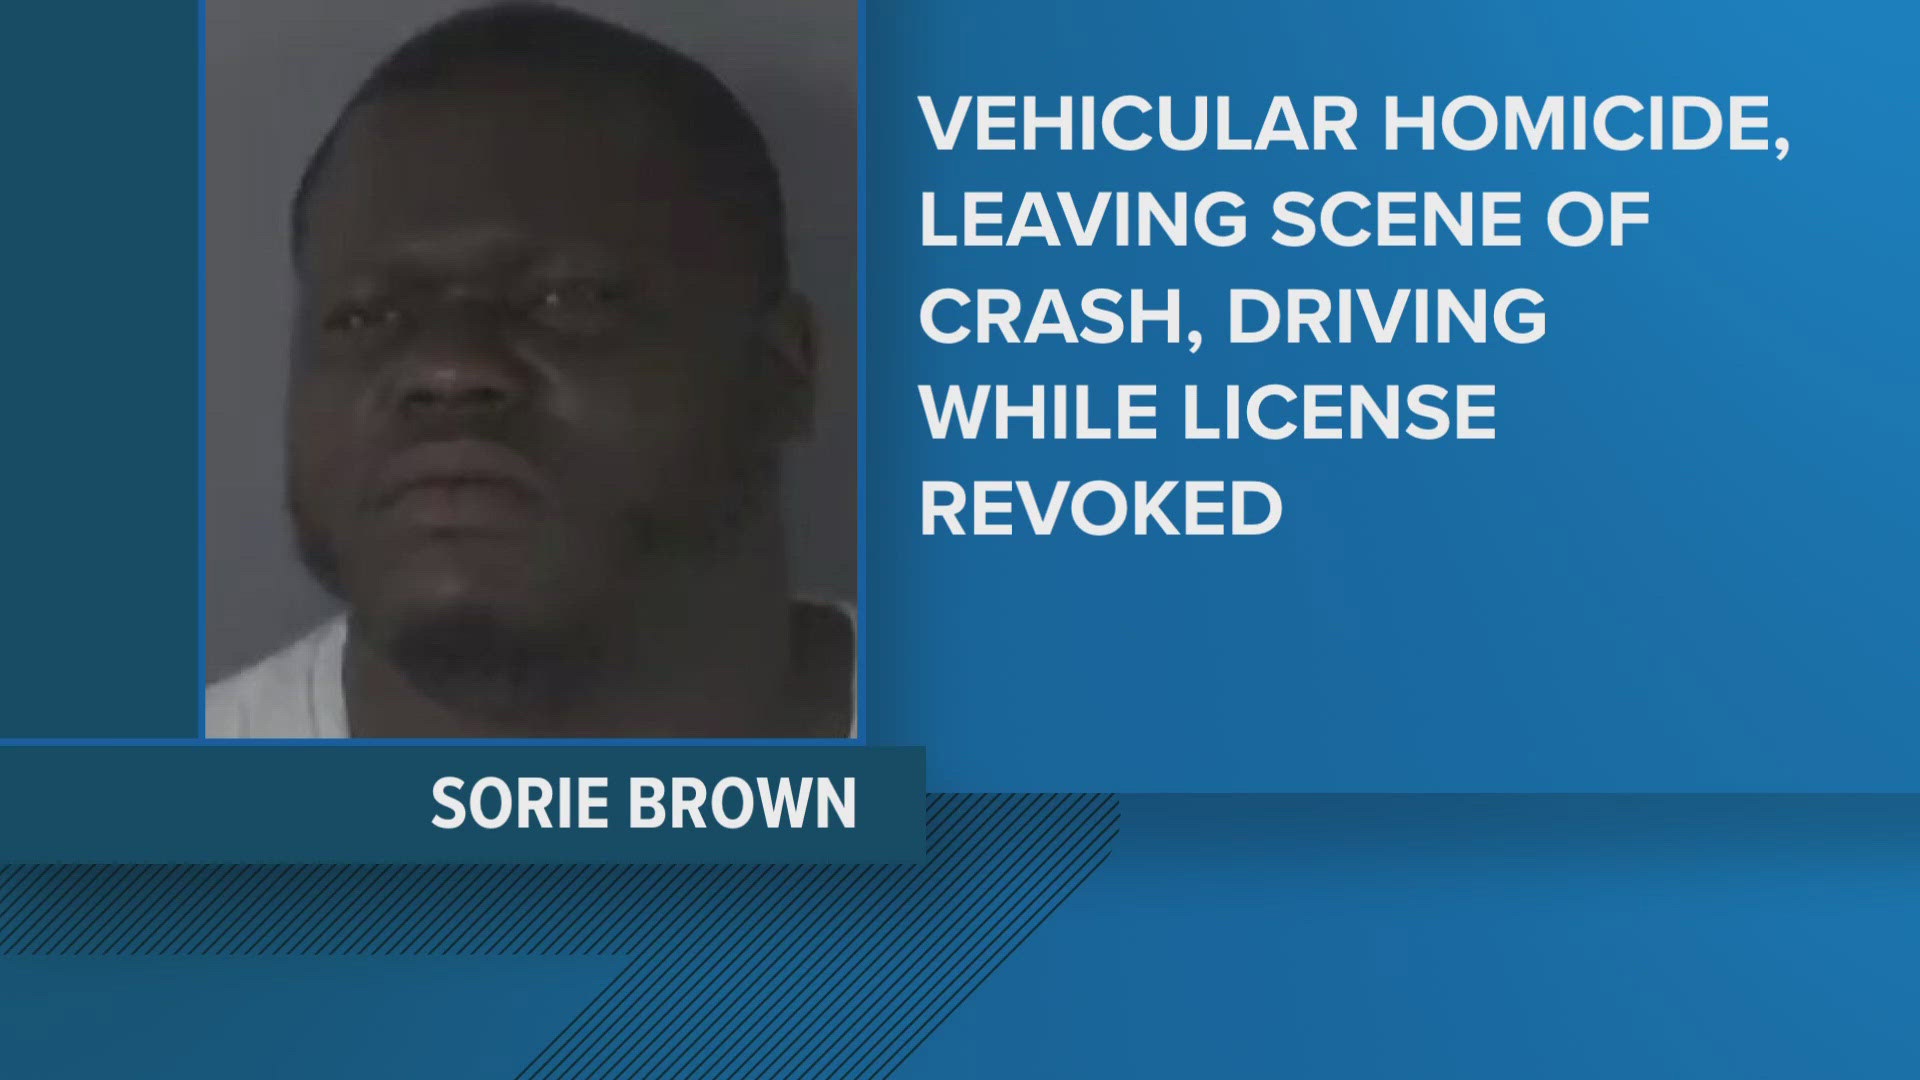 The crash killed 22-year-old Jerry Strepp on Feb. 6, 2023. Tuesday, Sorie Brown, 38, was arrested and is now held on $750,000 bond.